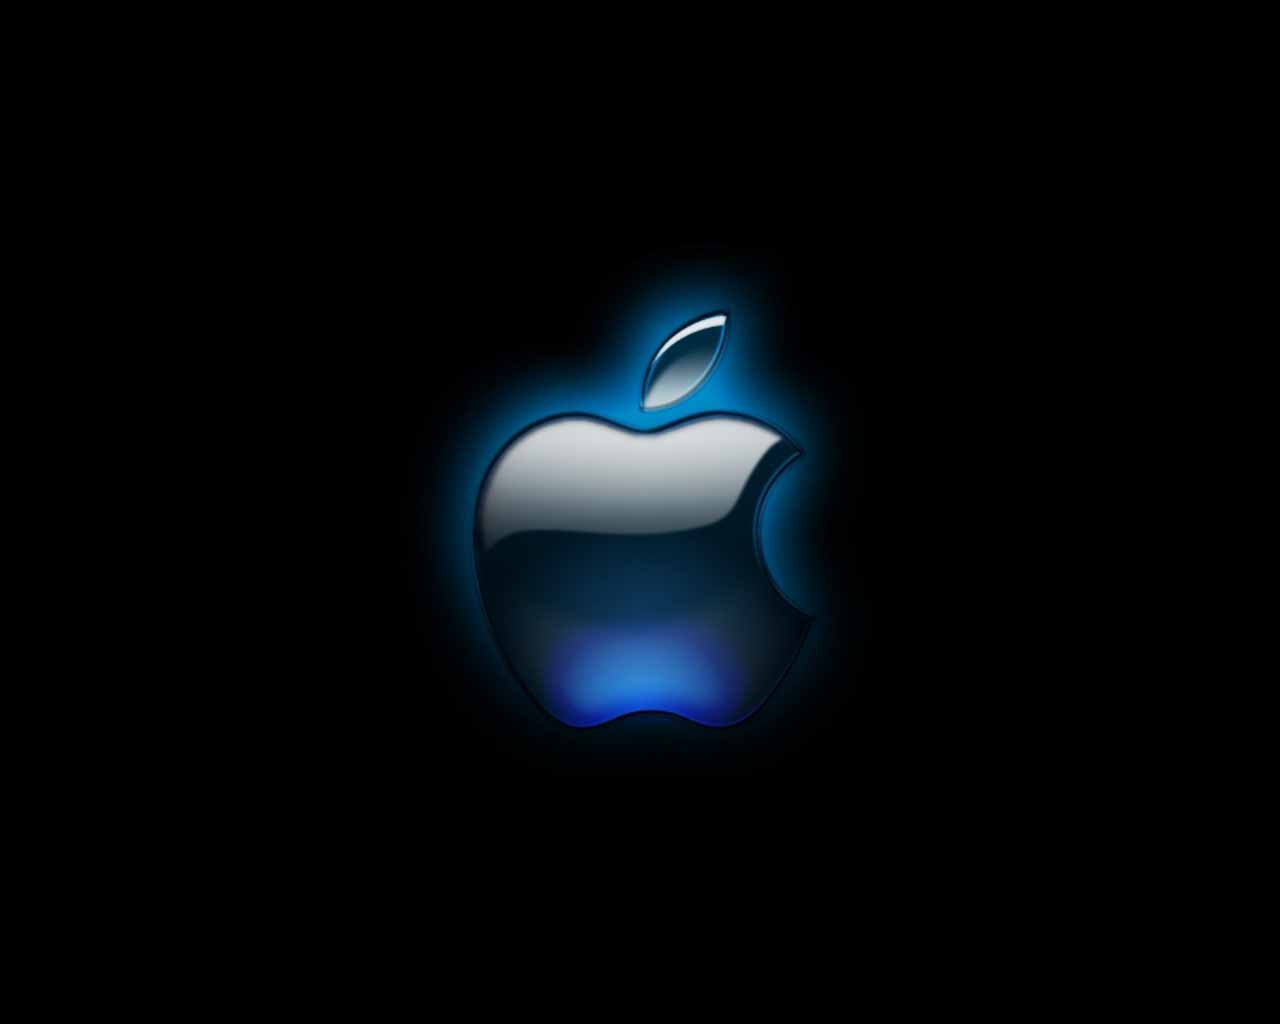 Apple Wallpaper Is Another Great 1280x1024PX